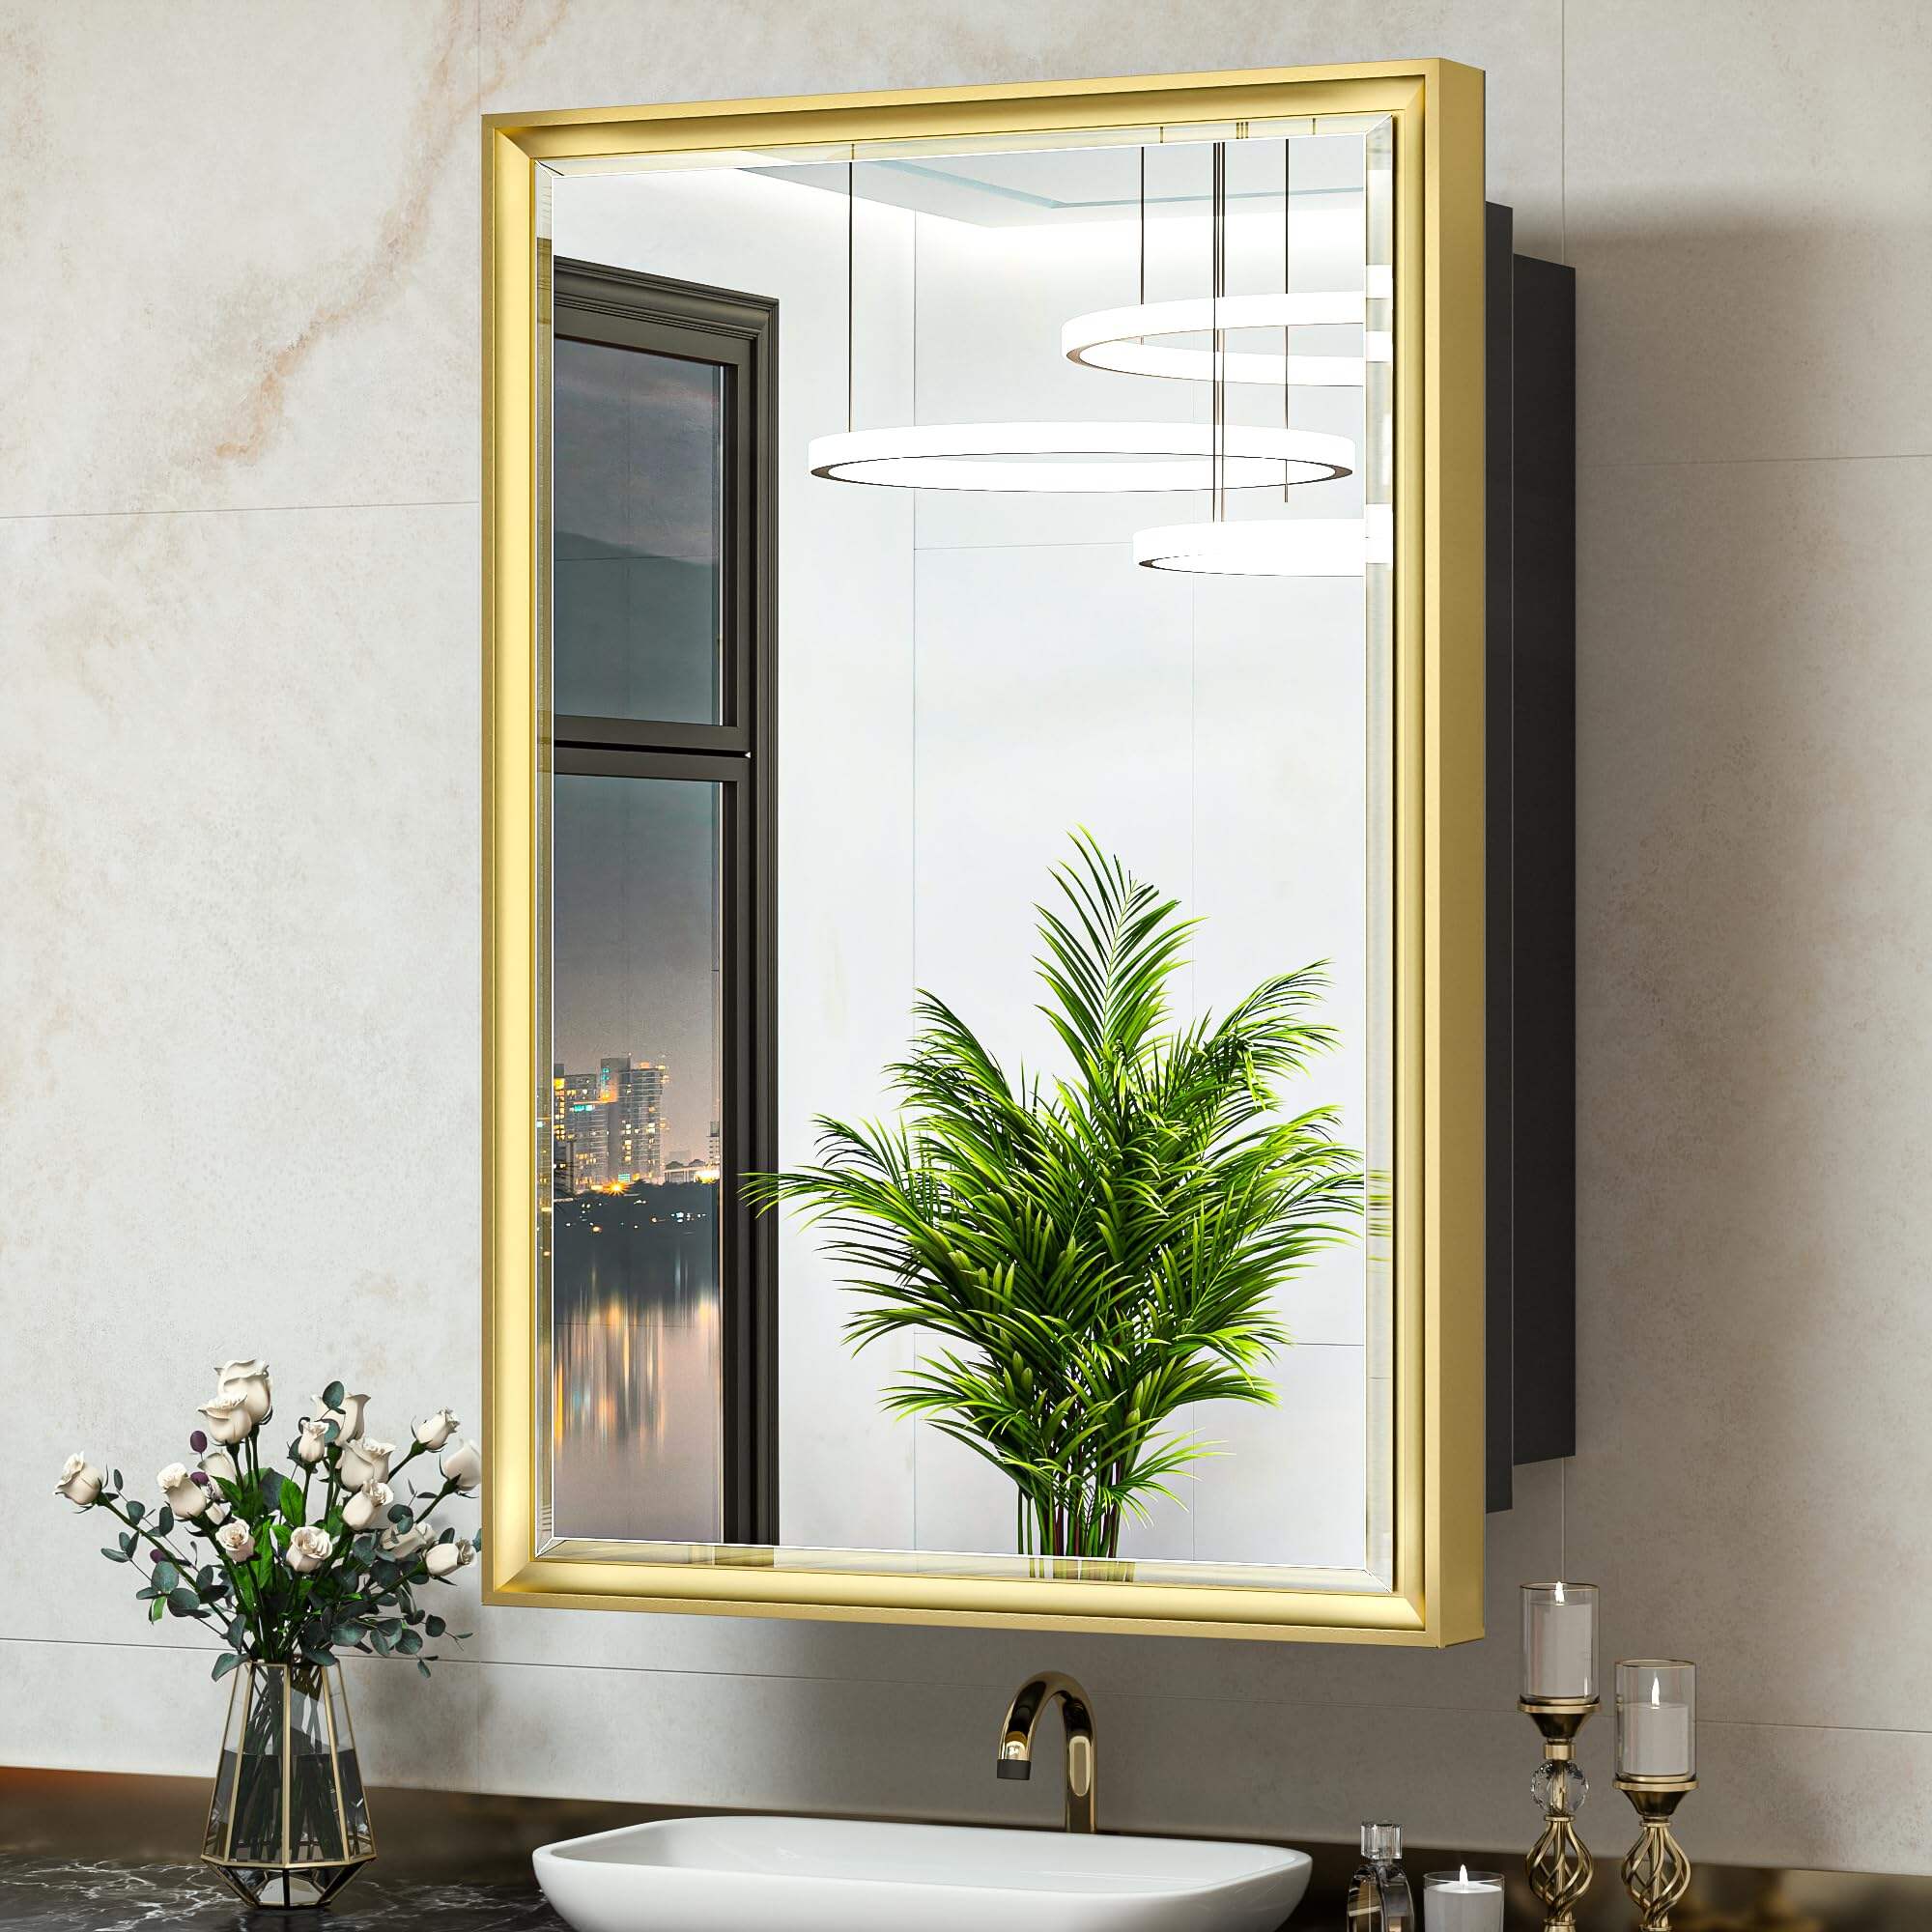 Foshan Haohan Smart Home Co., Ltd. Recessed Medicine Cabinet 24x36 Bathroom Vanity Mirror Gold Metal Framed Surface Wall Mounted with Aluminum Alloy Beveled Edges Design 1 Door for Modern Farmhouse